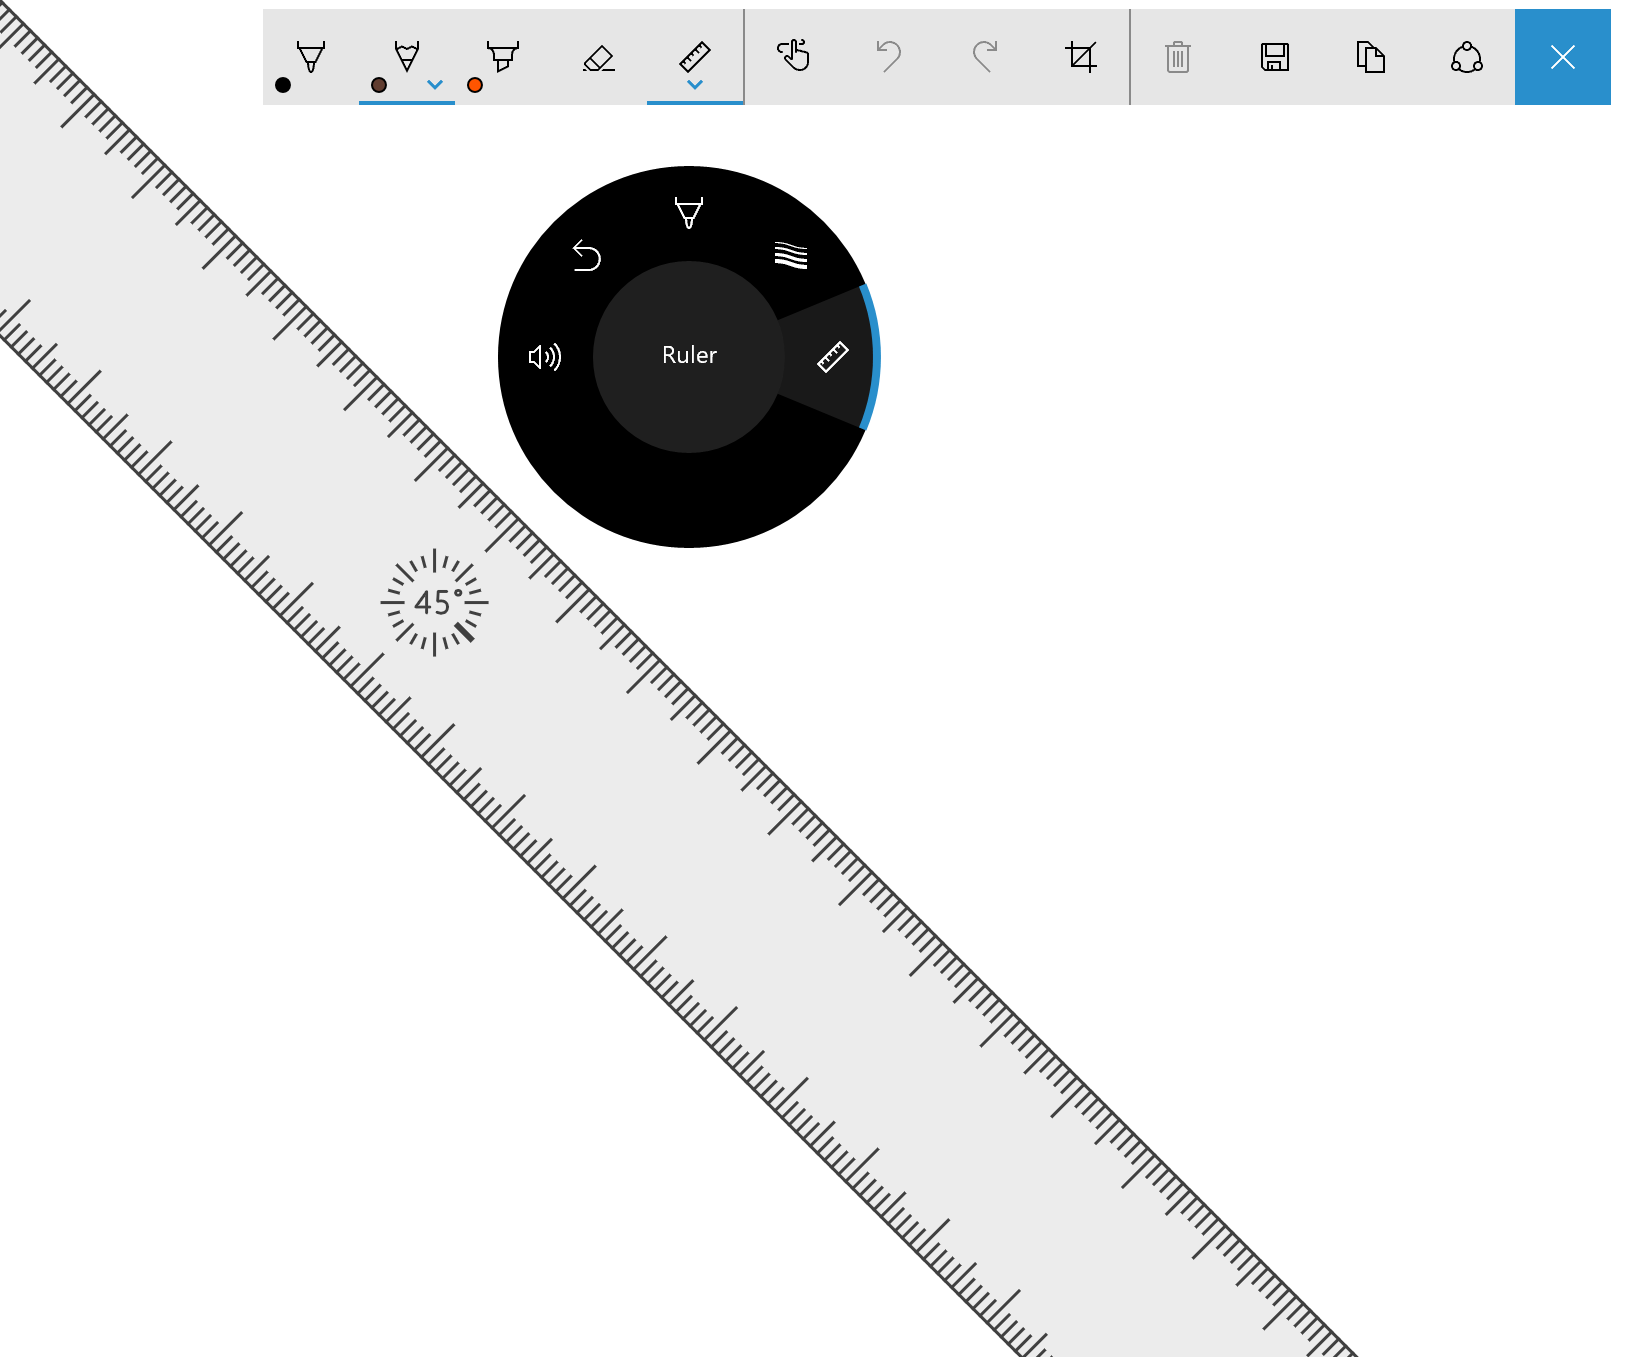 Surface Dial menu with ruler tool for the Windows Ink toolbar